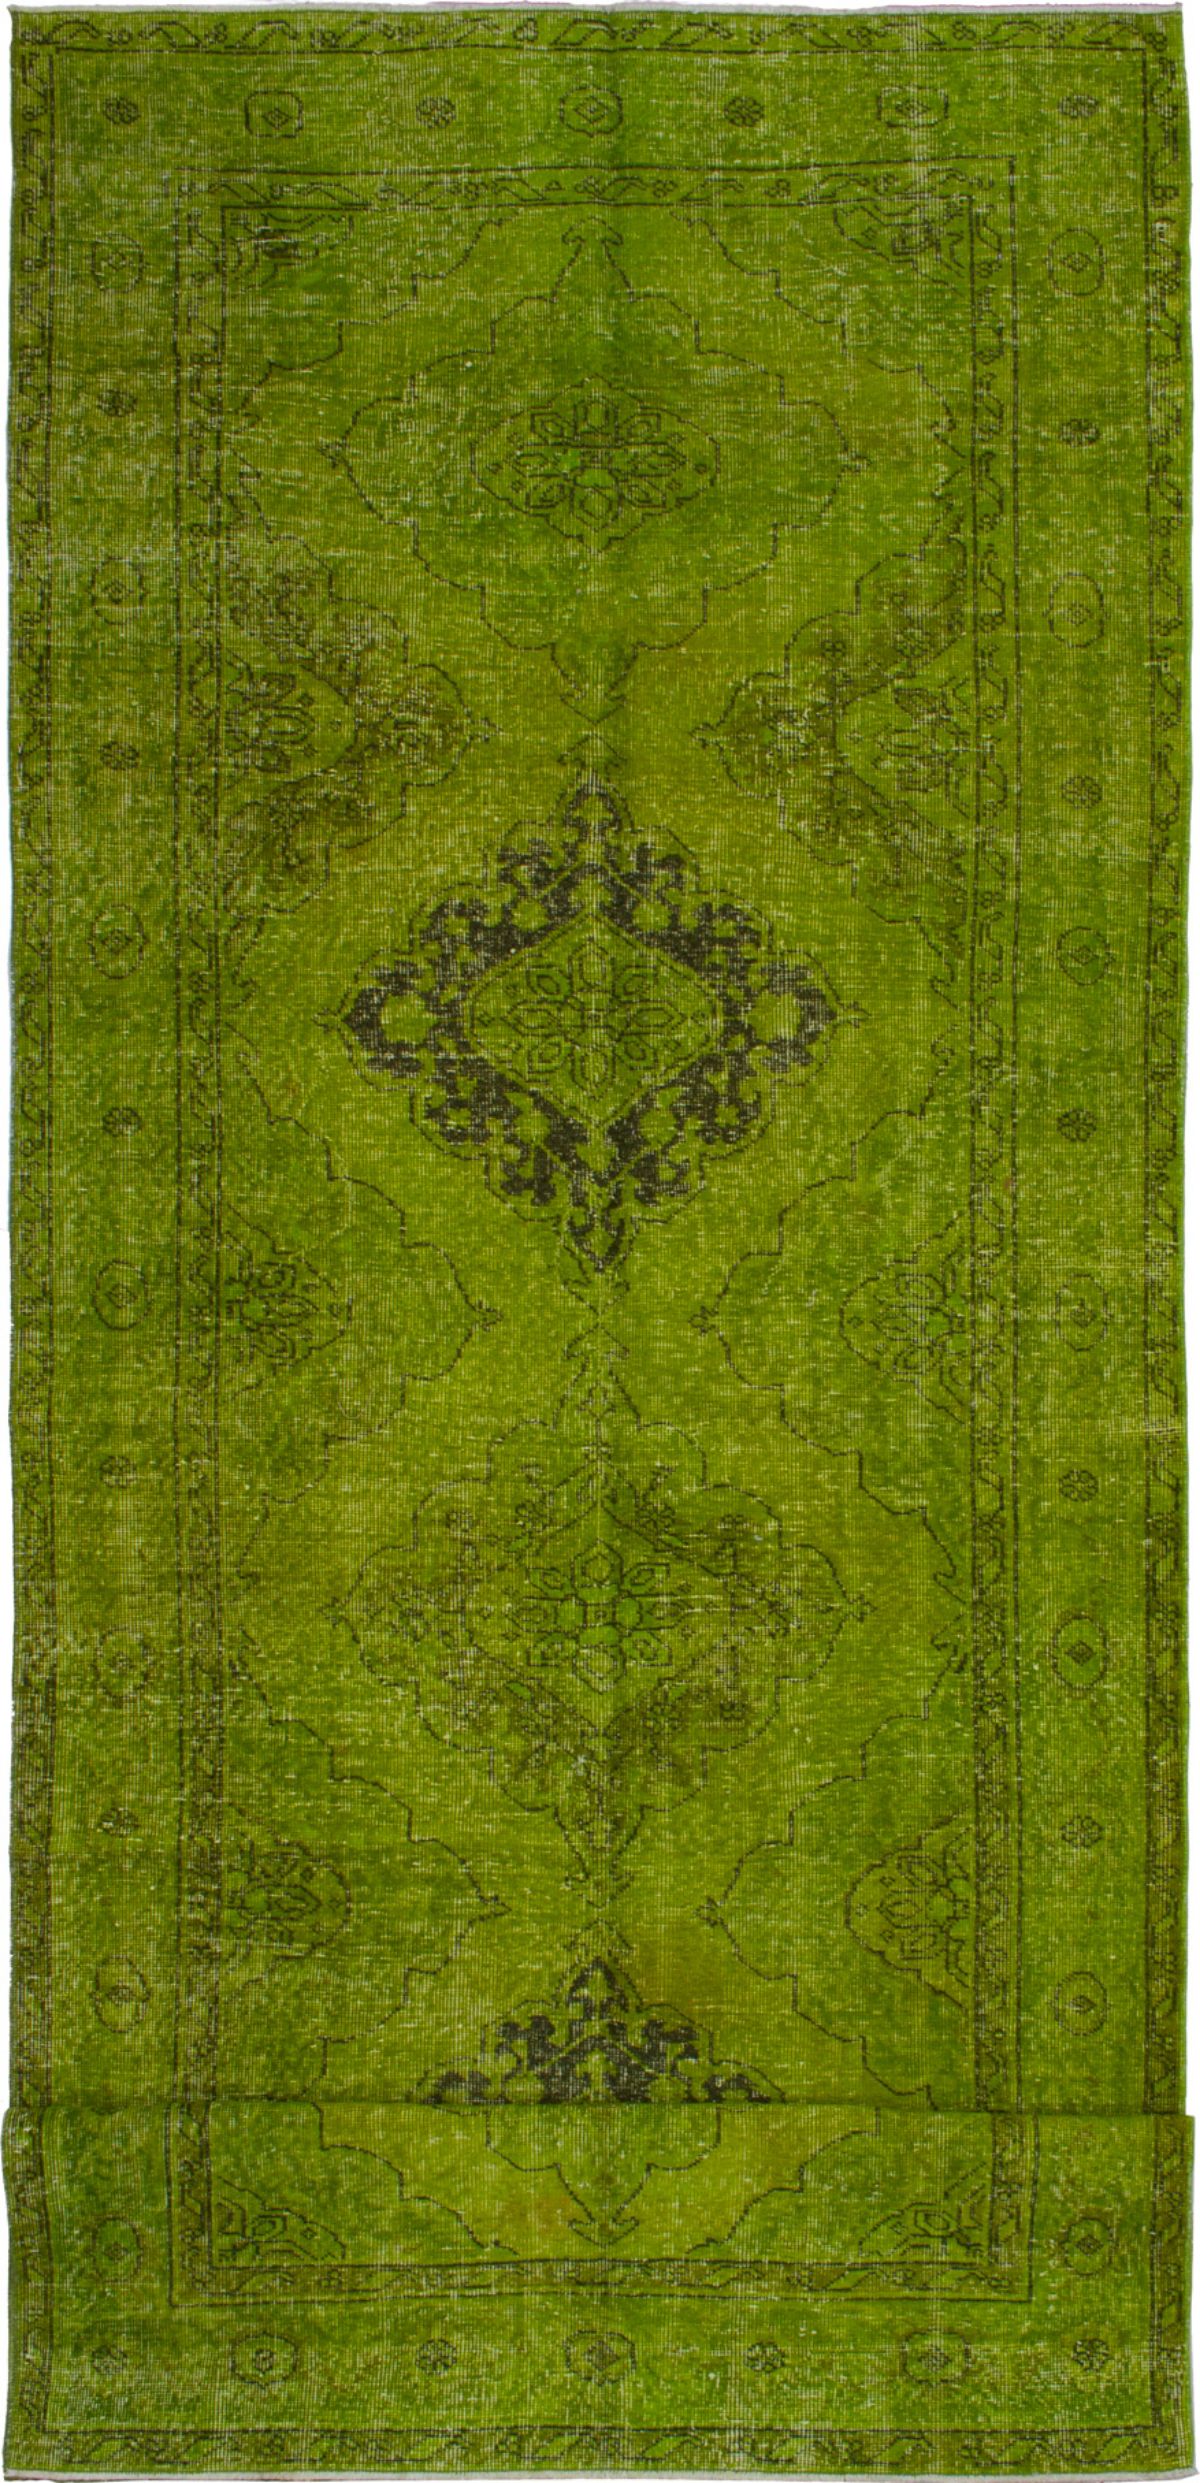 Hand-knotted Color Transition Olive Green Wool Rug 4'8" x 13'1" Size: 4'8" x 13'1"  